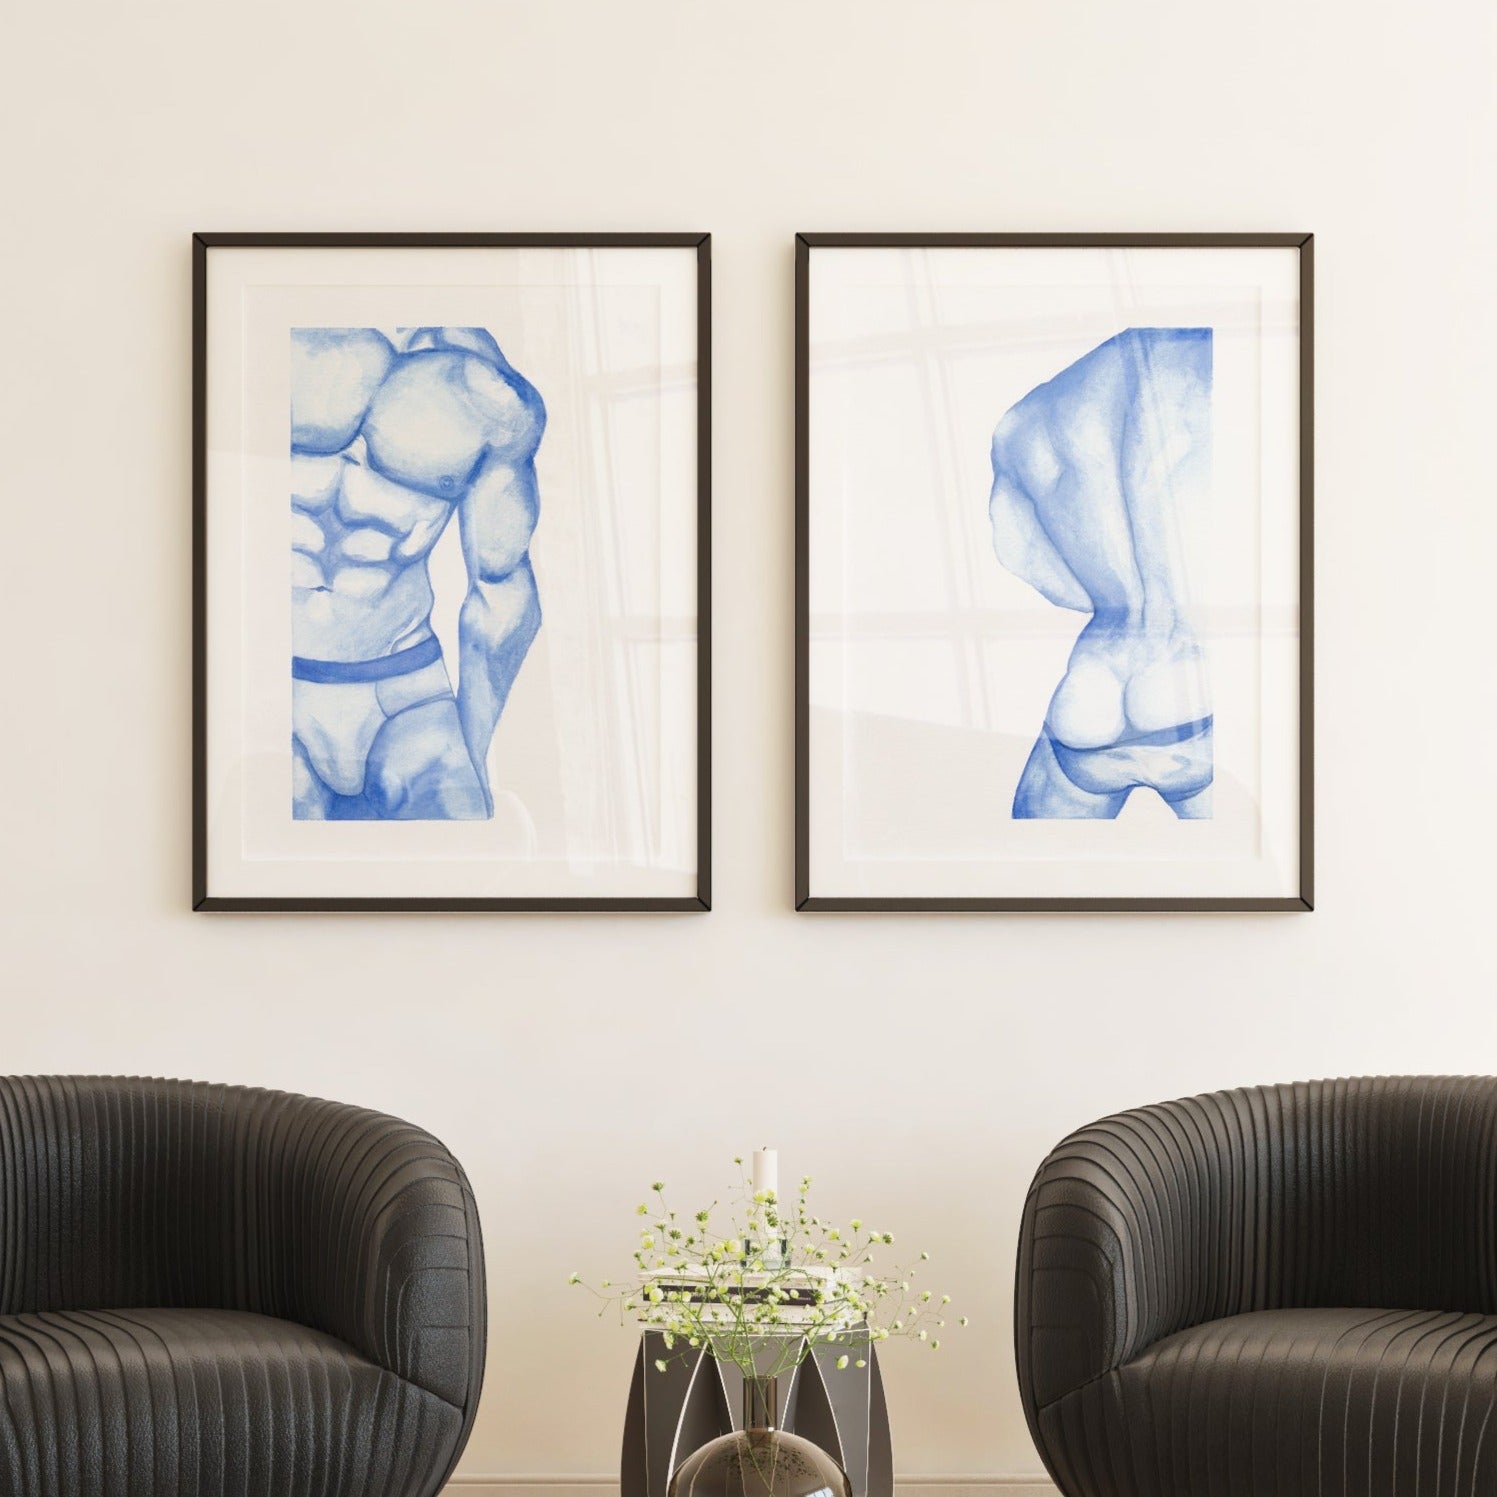 A set of 2 framed prints featuring nude men